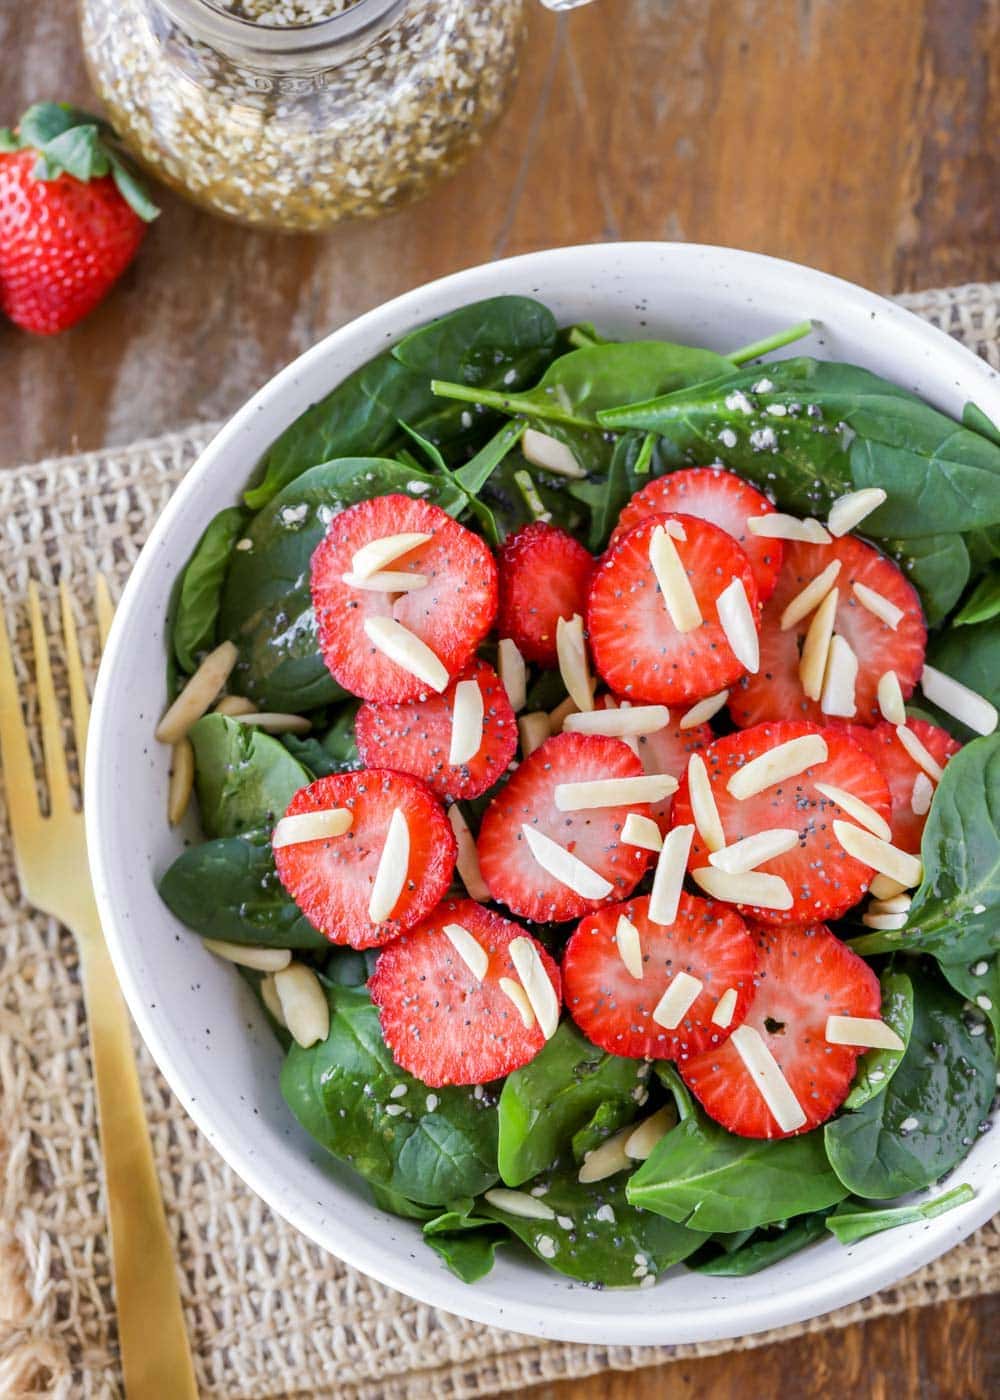 Spinach and strawberry salad topped with nuts in a white bowl